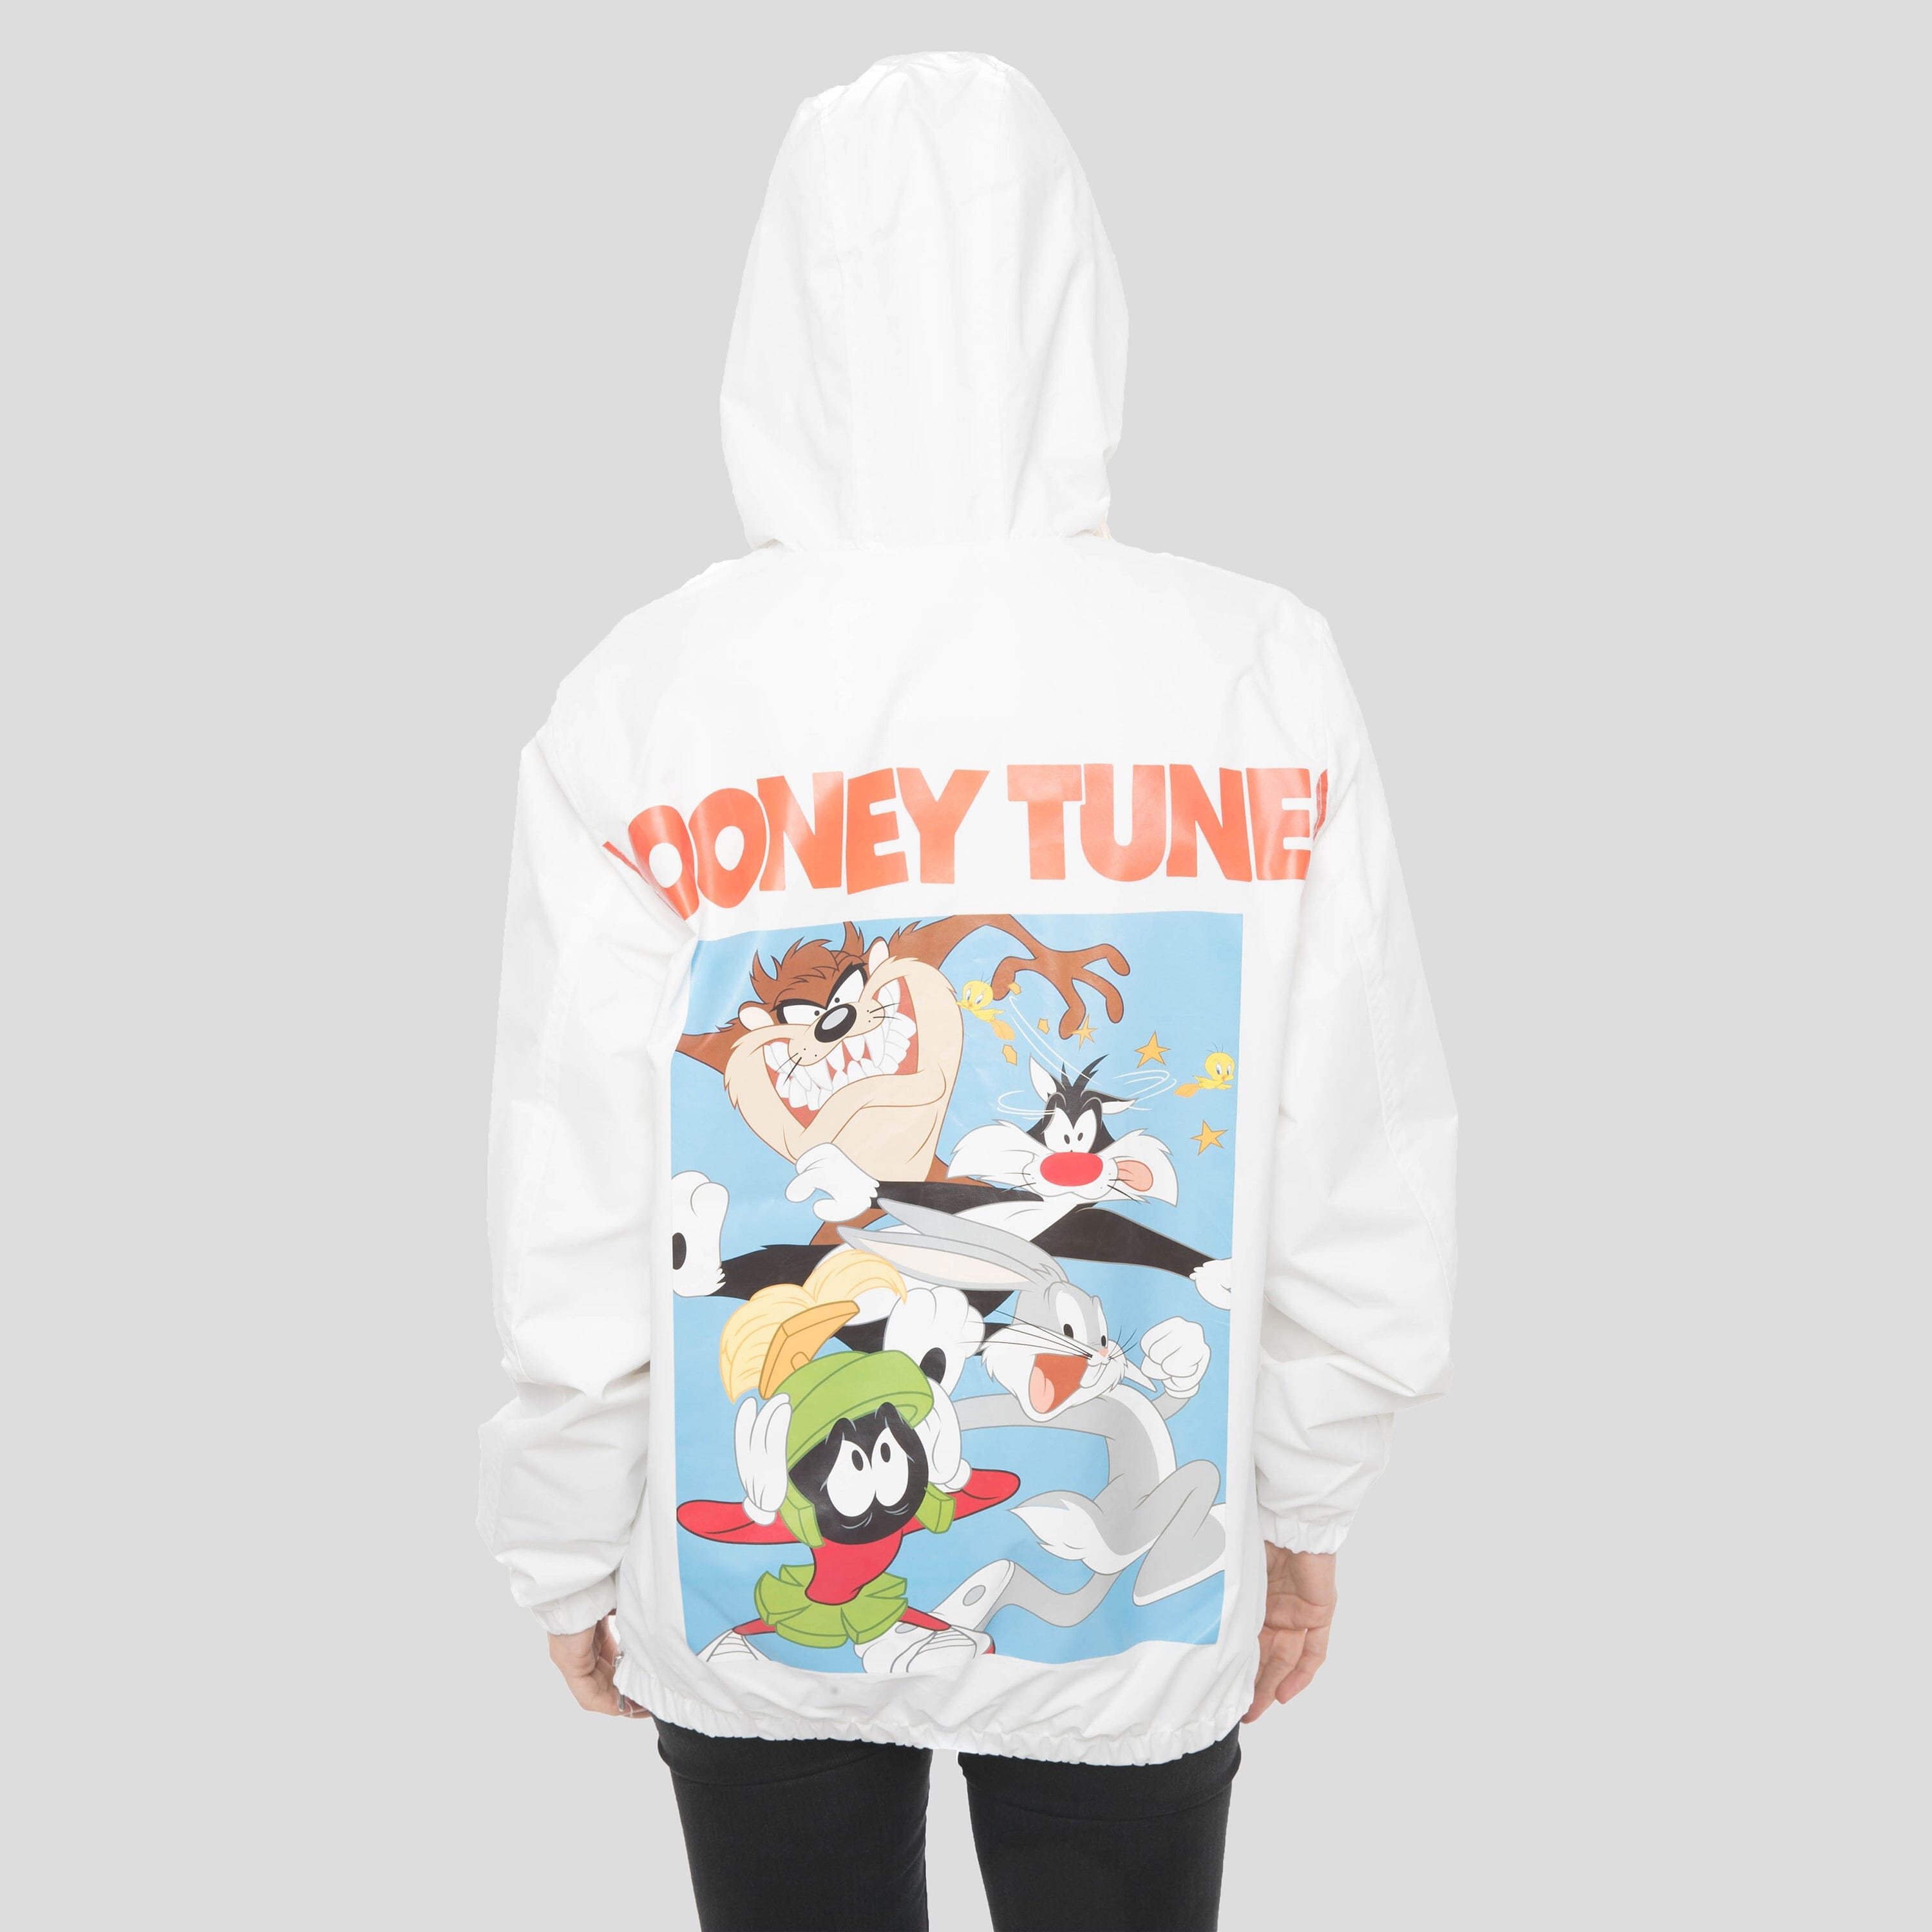 Women's Nickelodeon Collab Popover Oversized Jacket - FINAL SALE Womens Jacket Members Only 